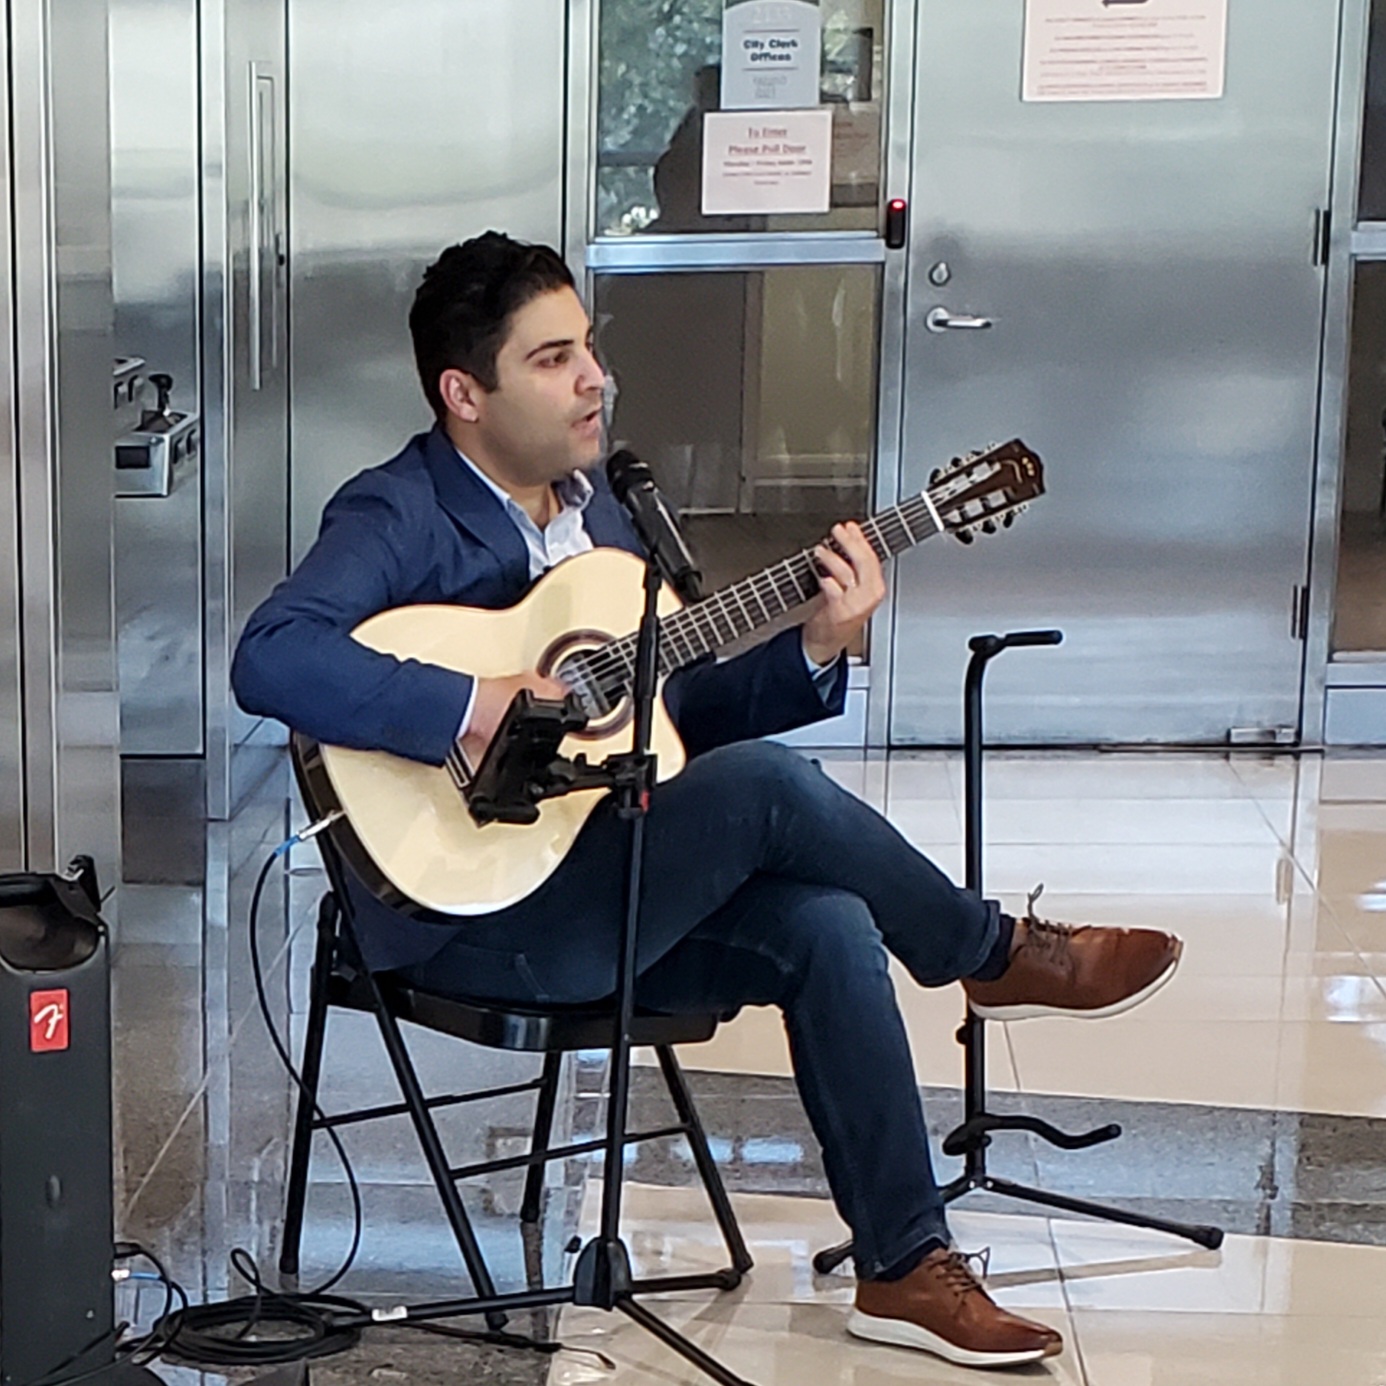 Man with guitar performs in Fresno City Hall Art Hop event.